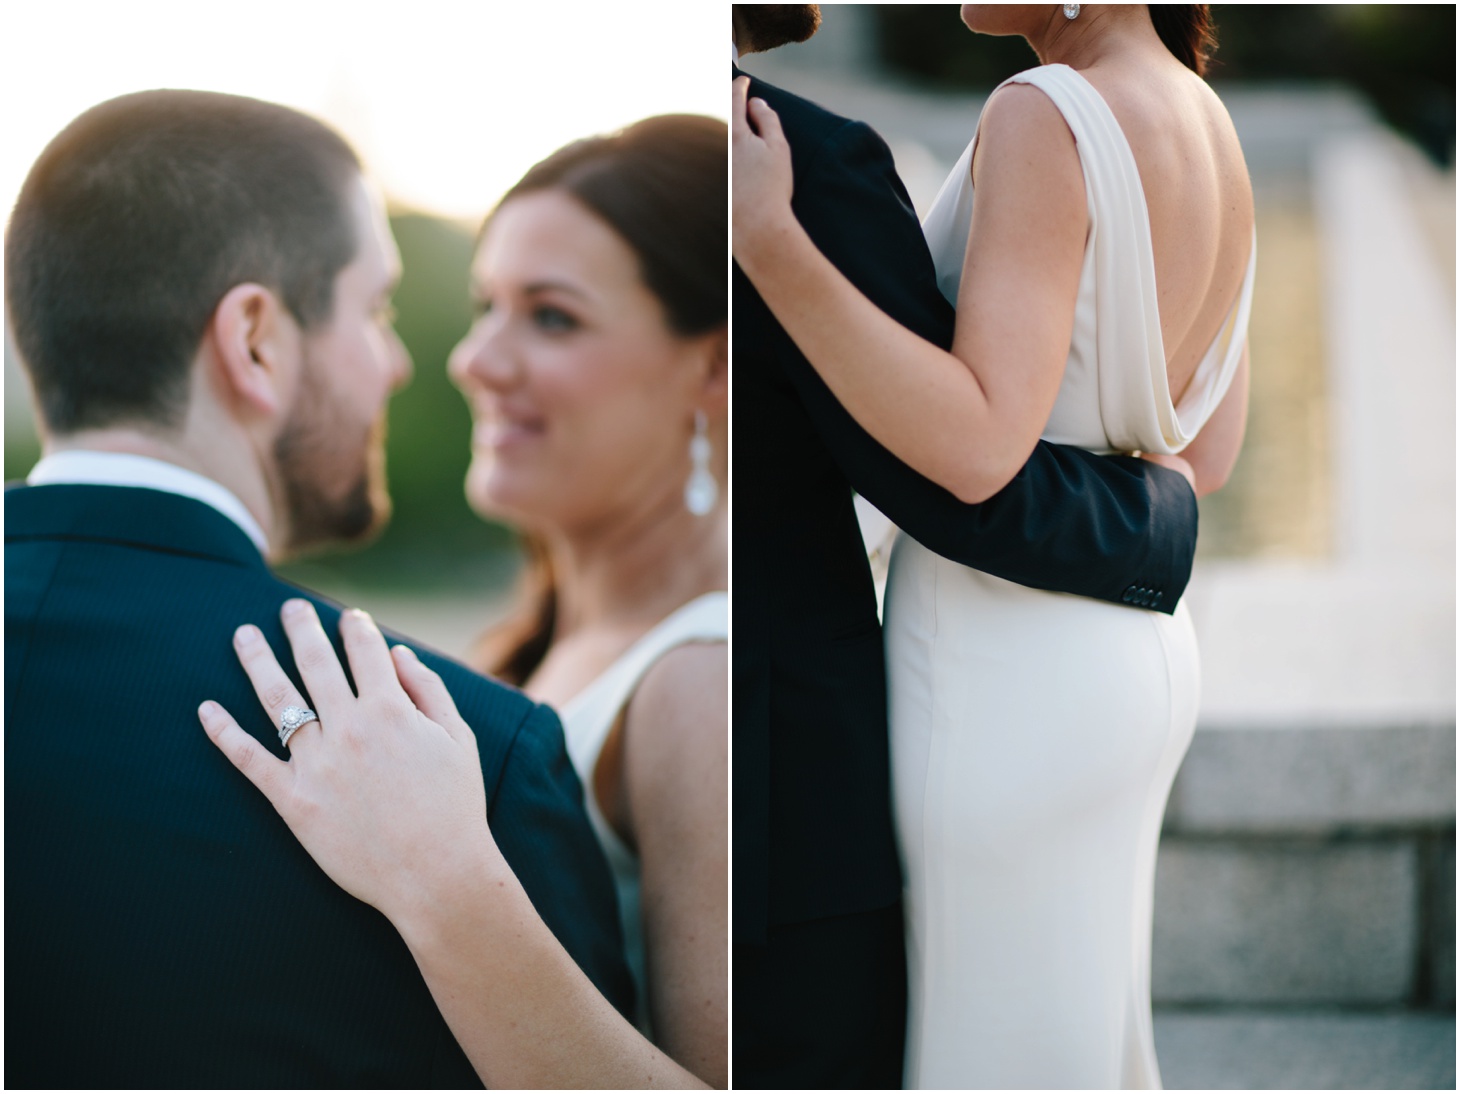 Mikey & Megan, Downtown DC Wedding at National Museum of Women in the Arts by Sarah Bradshaw Photography_0039.jpg